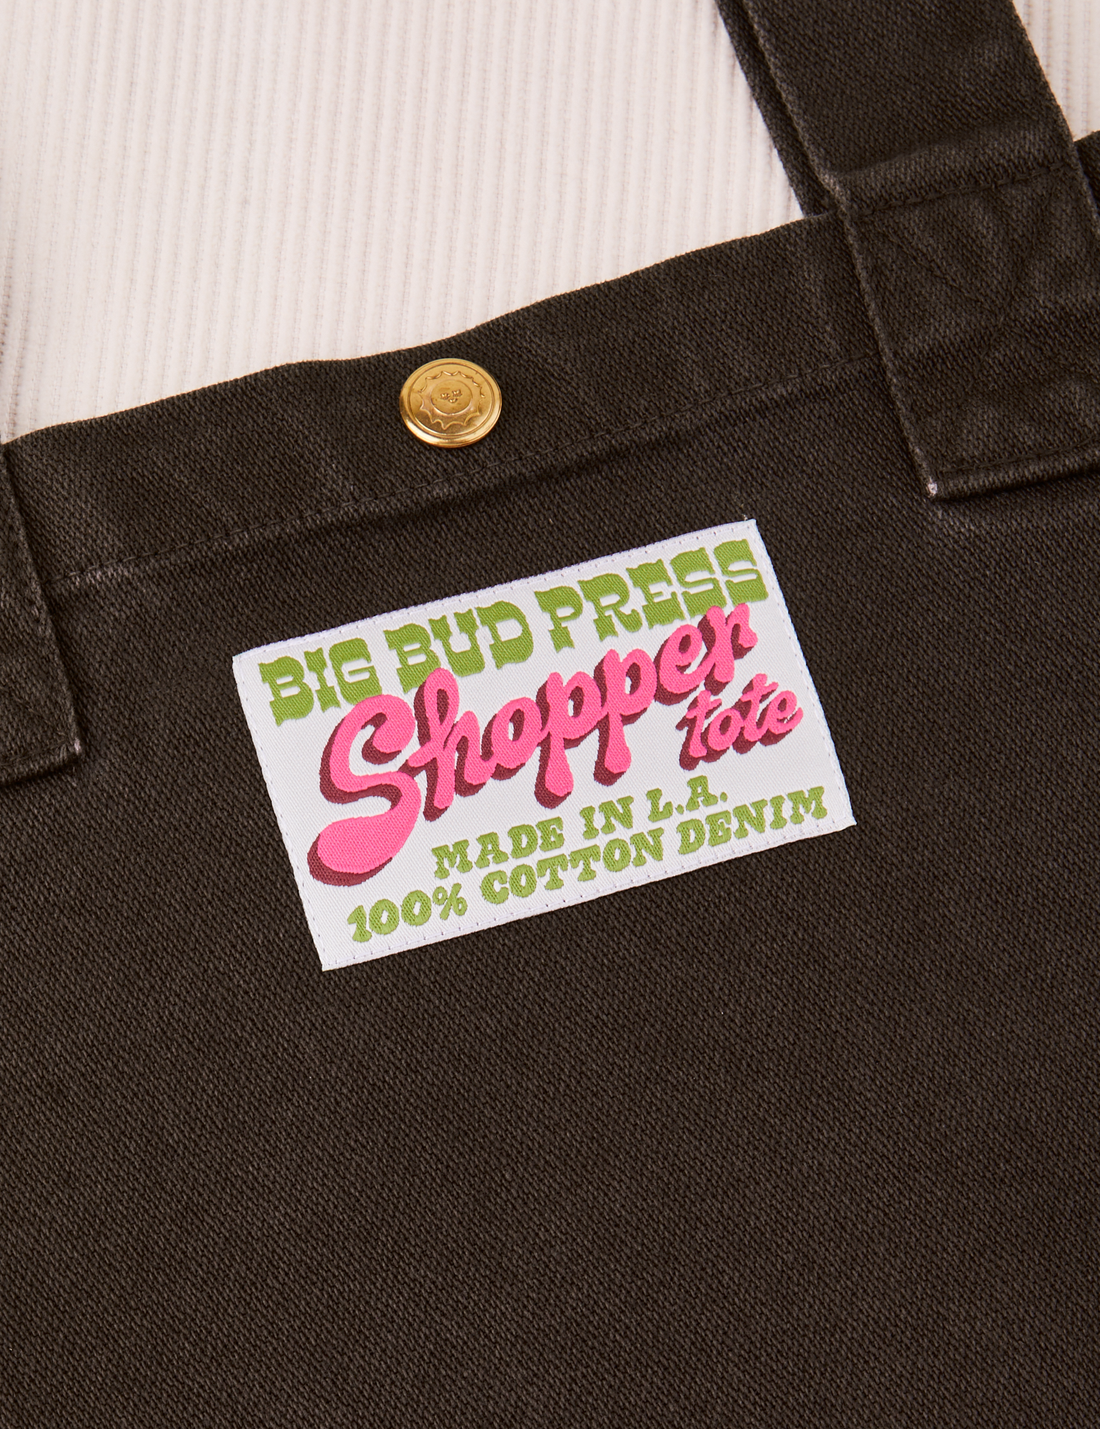 Sun Baby brass snap on Shopper Tote Bag in Espresso Brown. Bag label with green and pink text that reads "Big Bud Press Shopper Tote, Made in L.A.,100% Cotton Denim" on white background